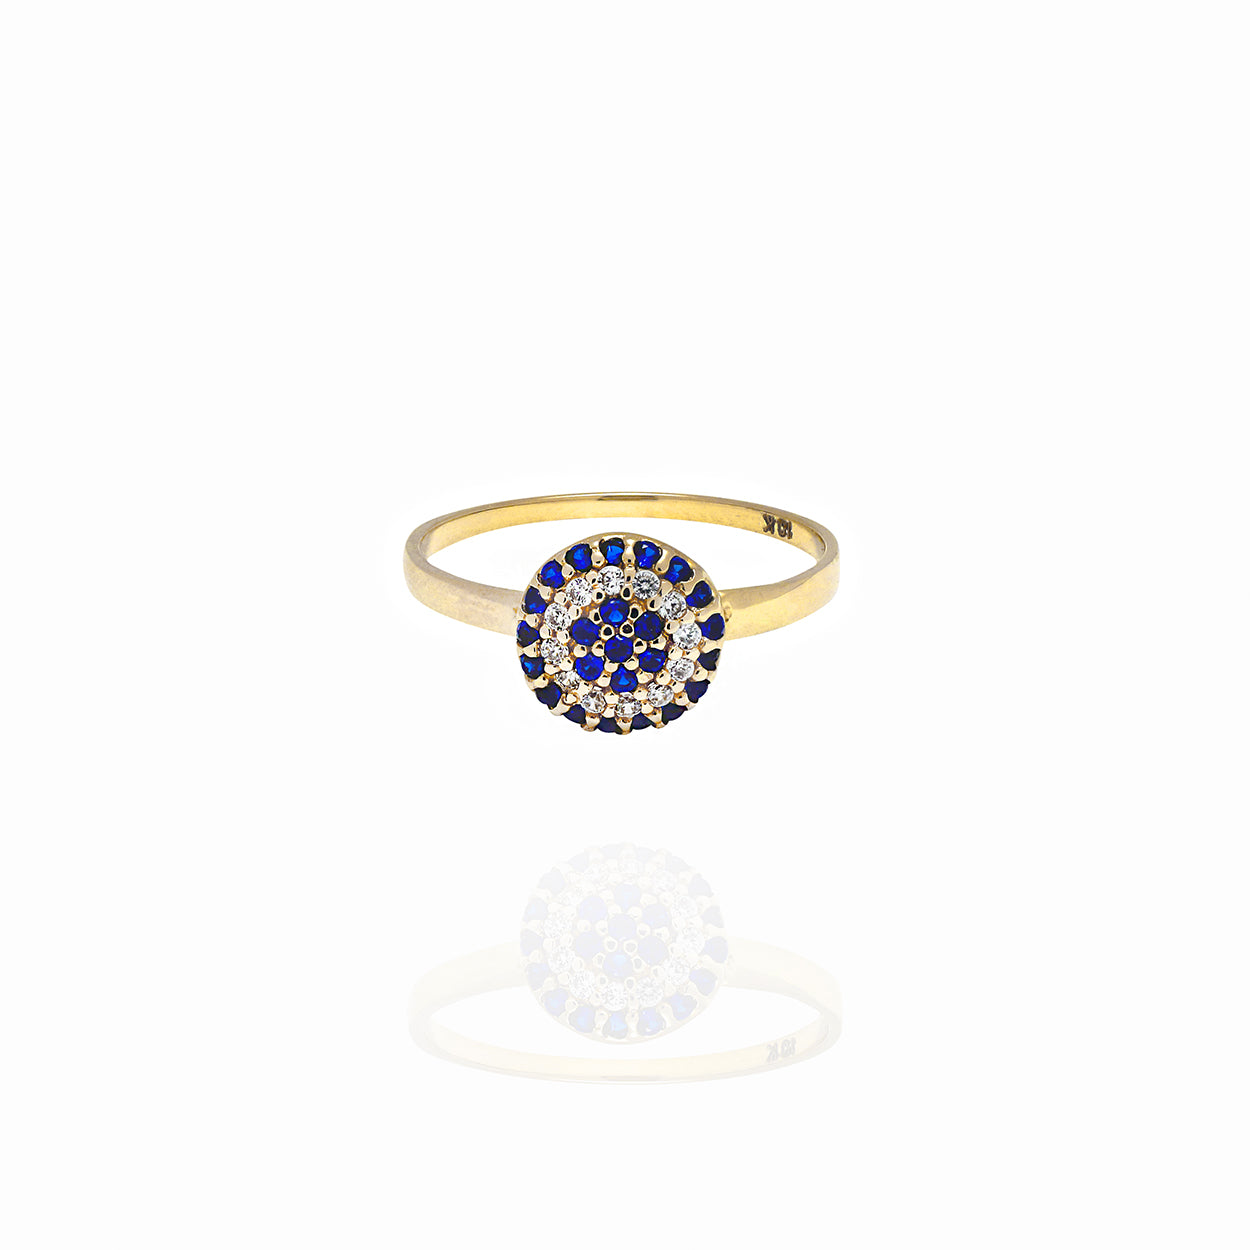 10kt Yellow Gold Round Top Ring set with Sapphires and Cubic Zirconia